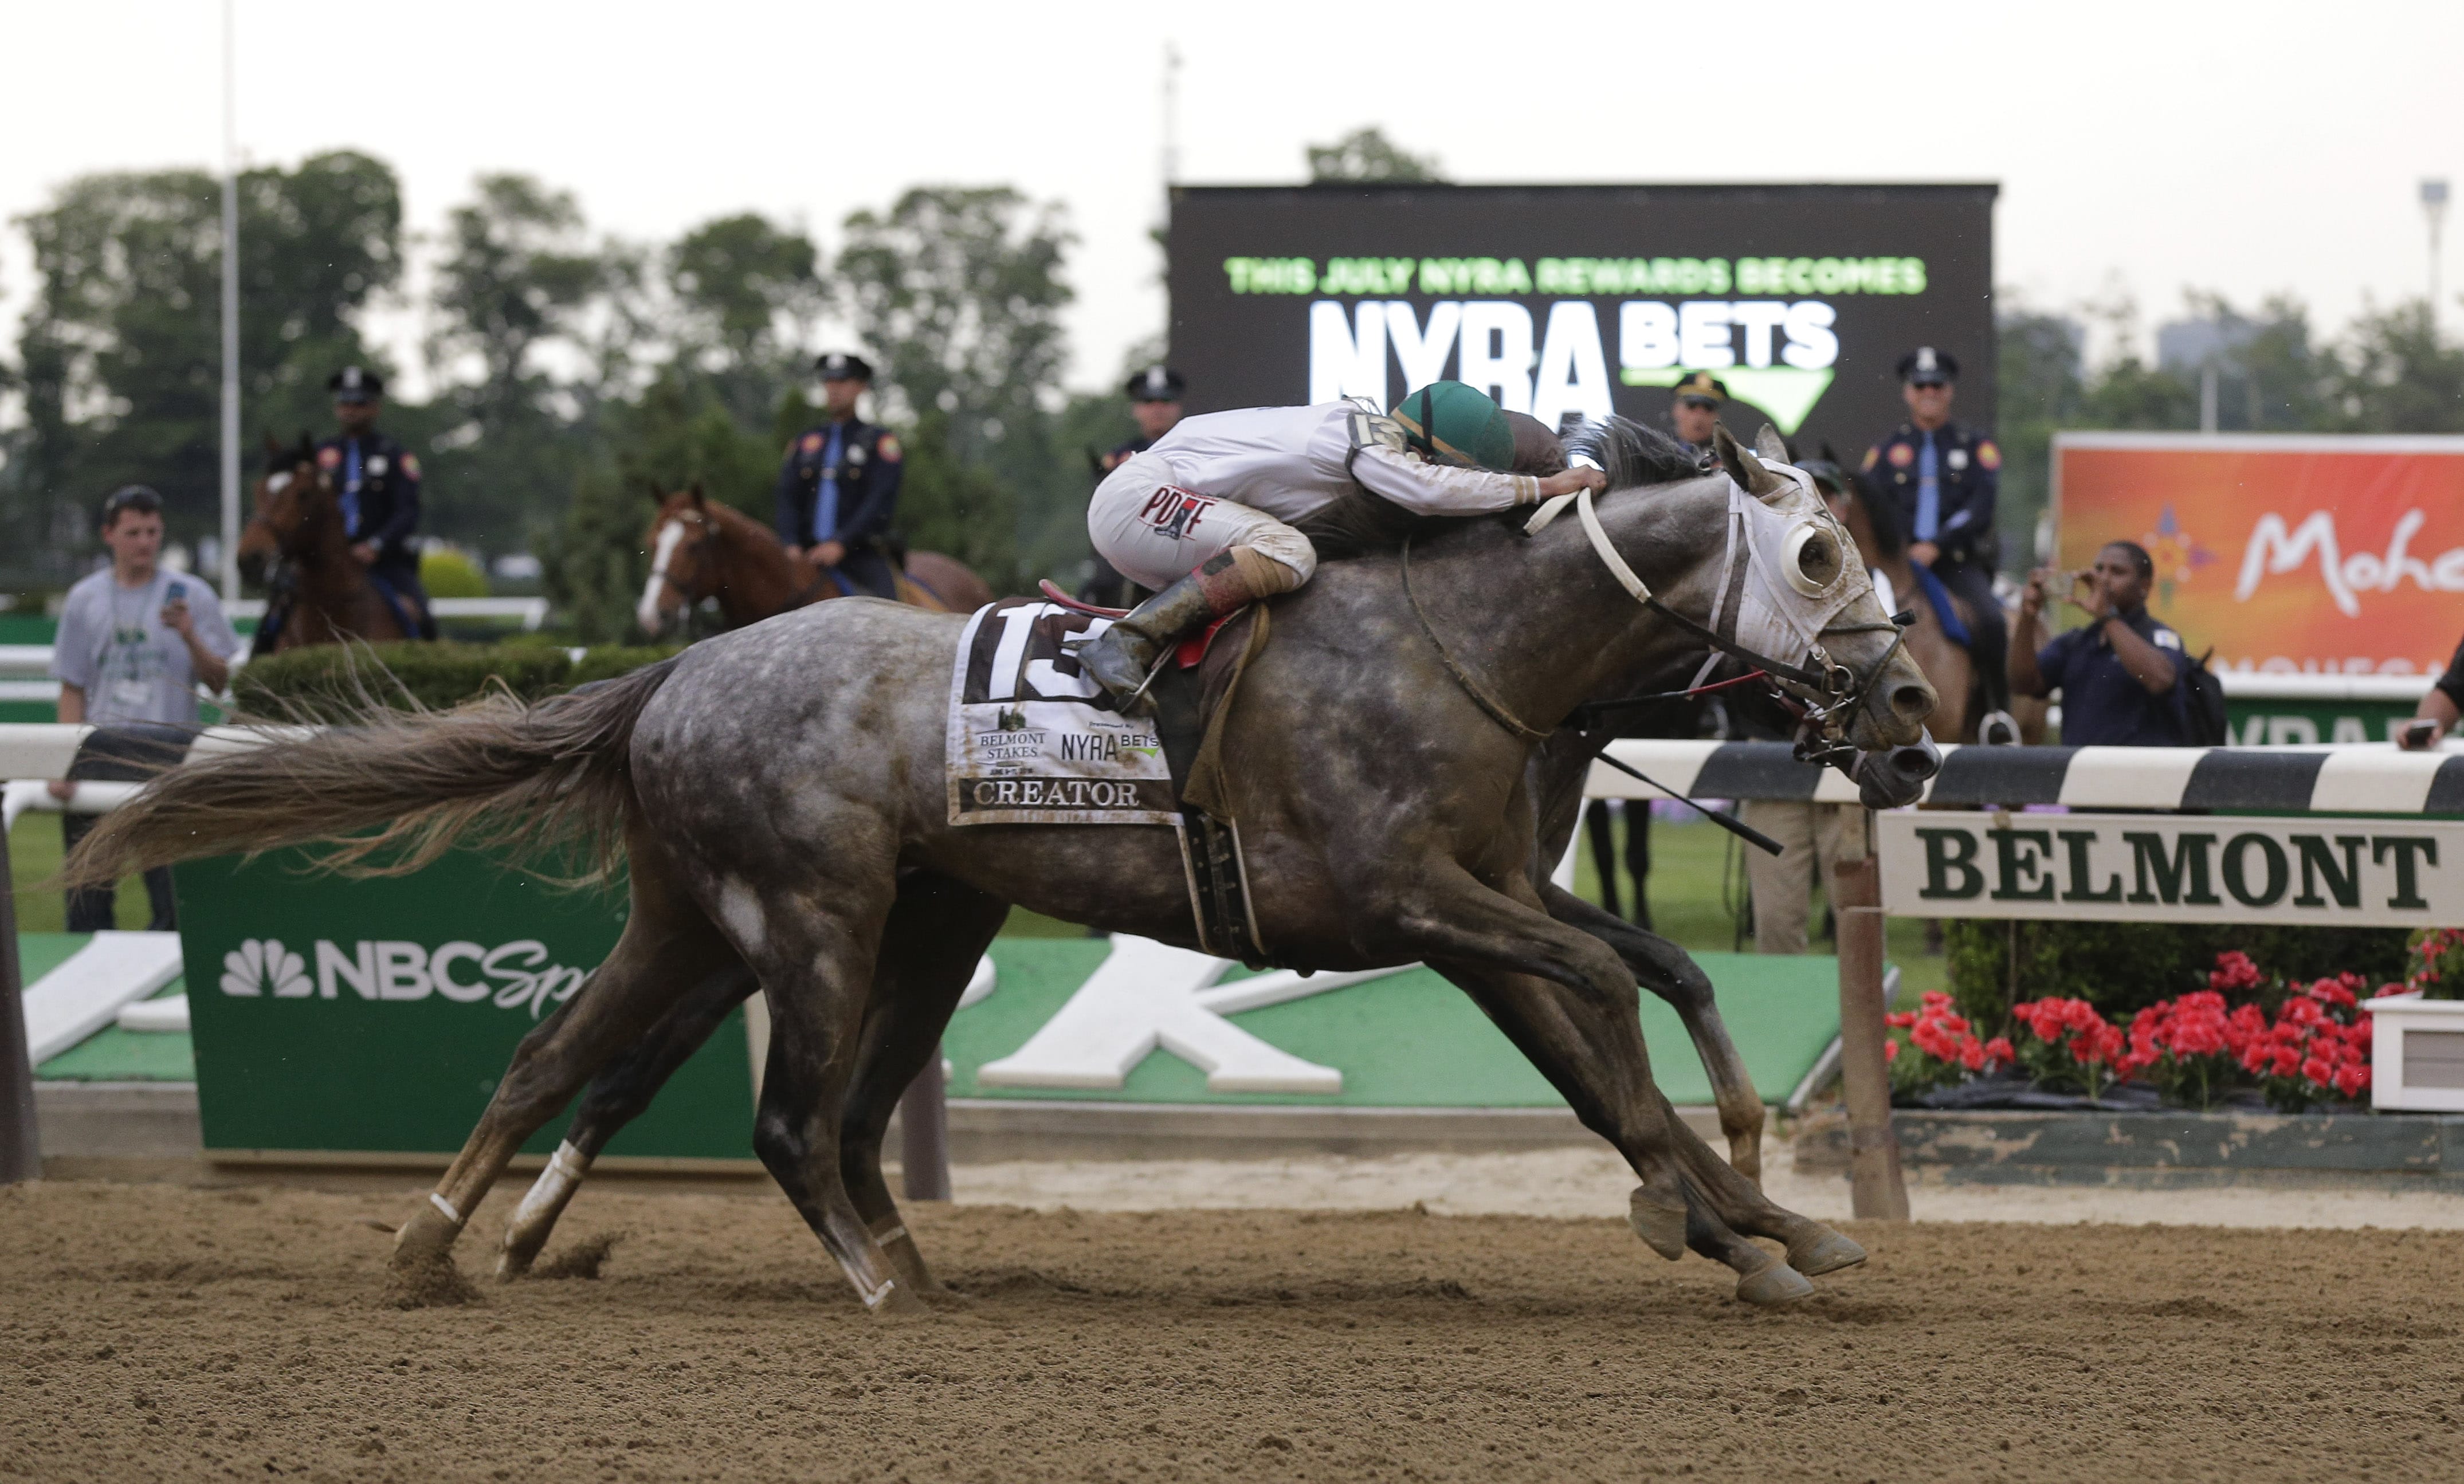 Creator, with jockey Irad Ortiz Jr. up, edges out Lani, with Yutaka Take up, to win the 148th running of the Belmont Stakes horse race, Saturday, June 11, 2016, in Elmont, N.Y.